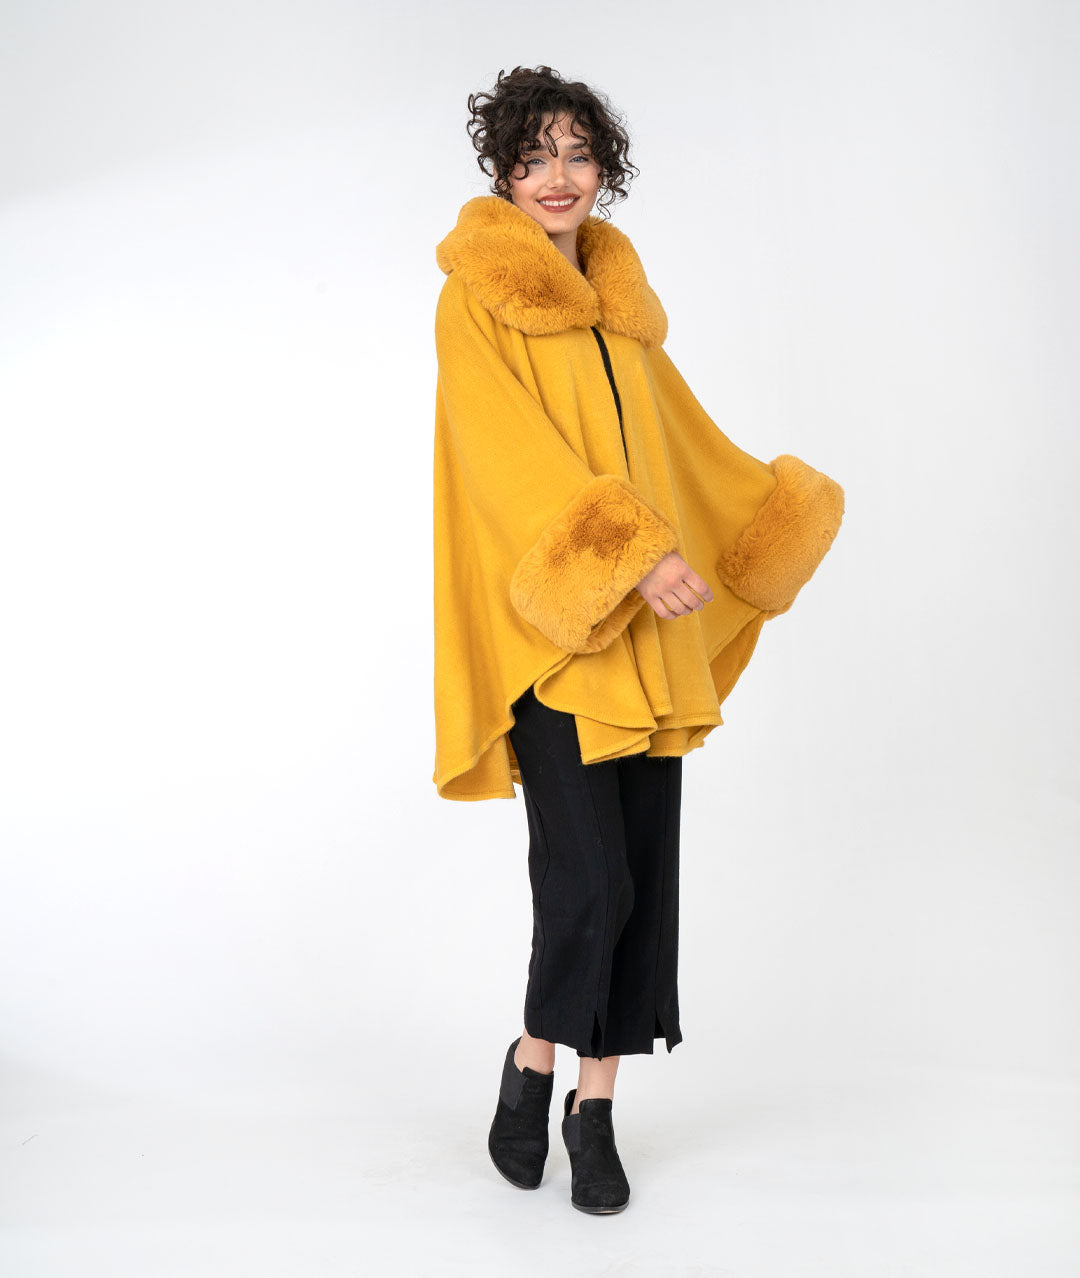 model is wearing all black with a mustard cape over top